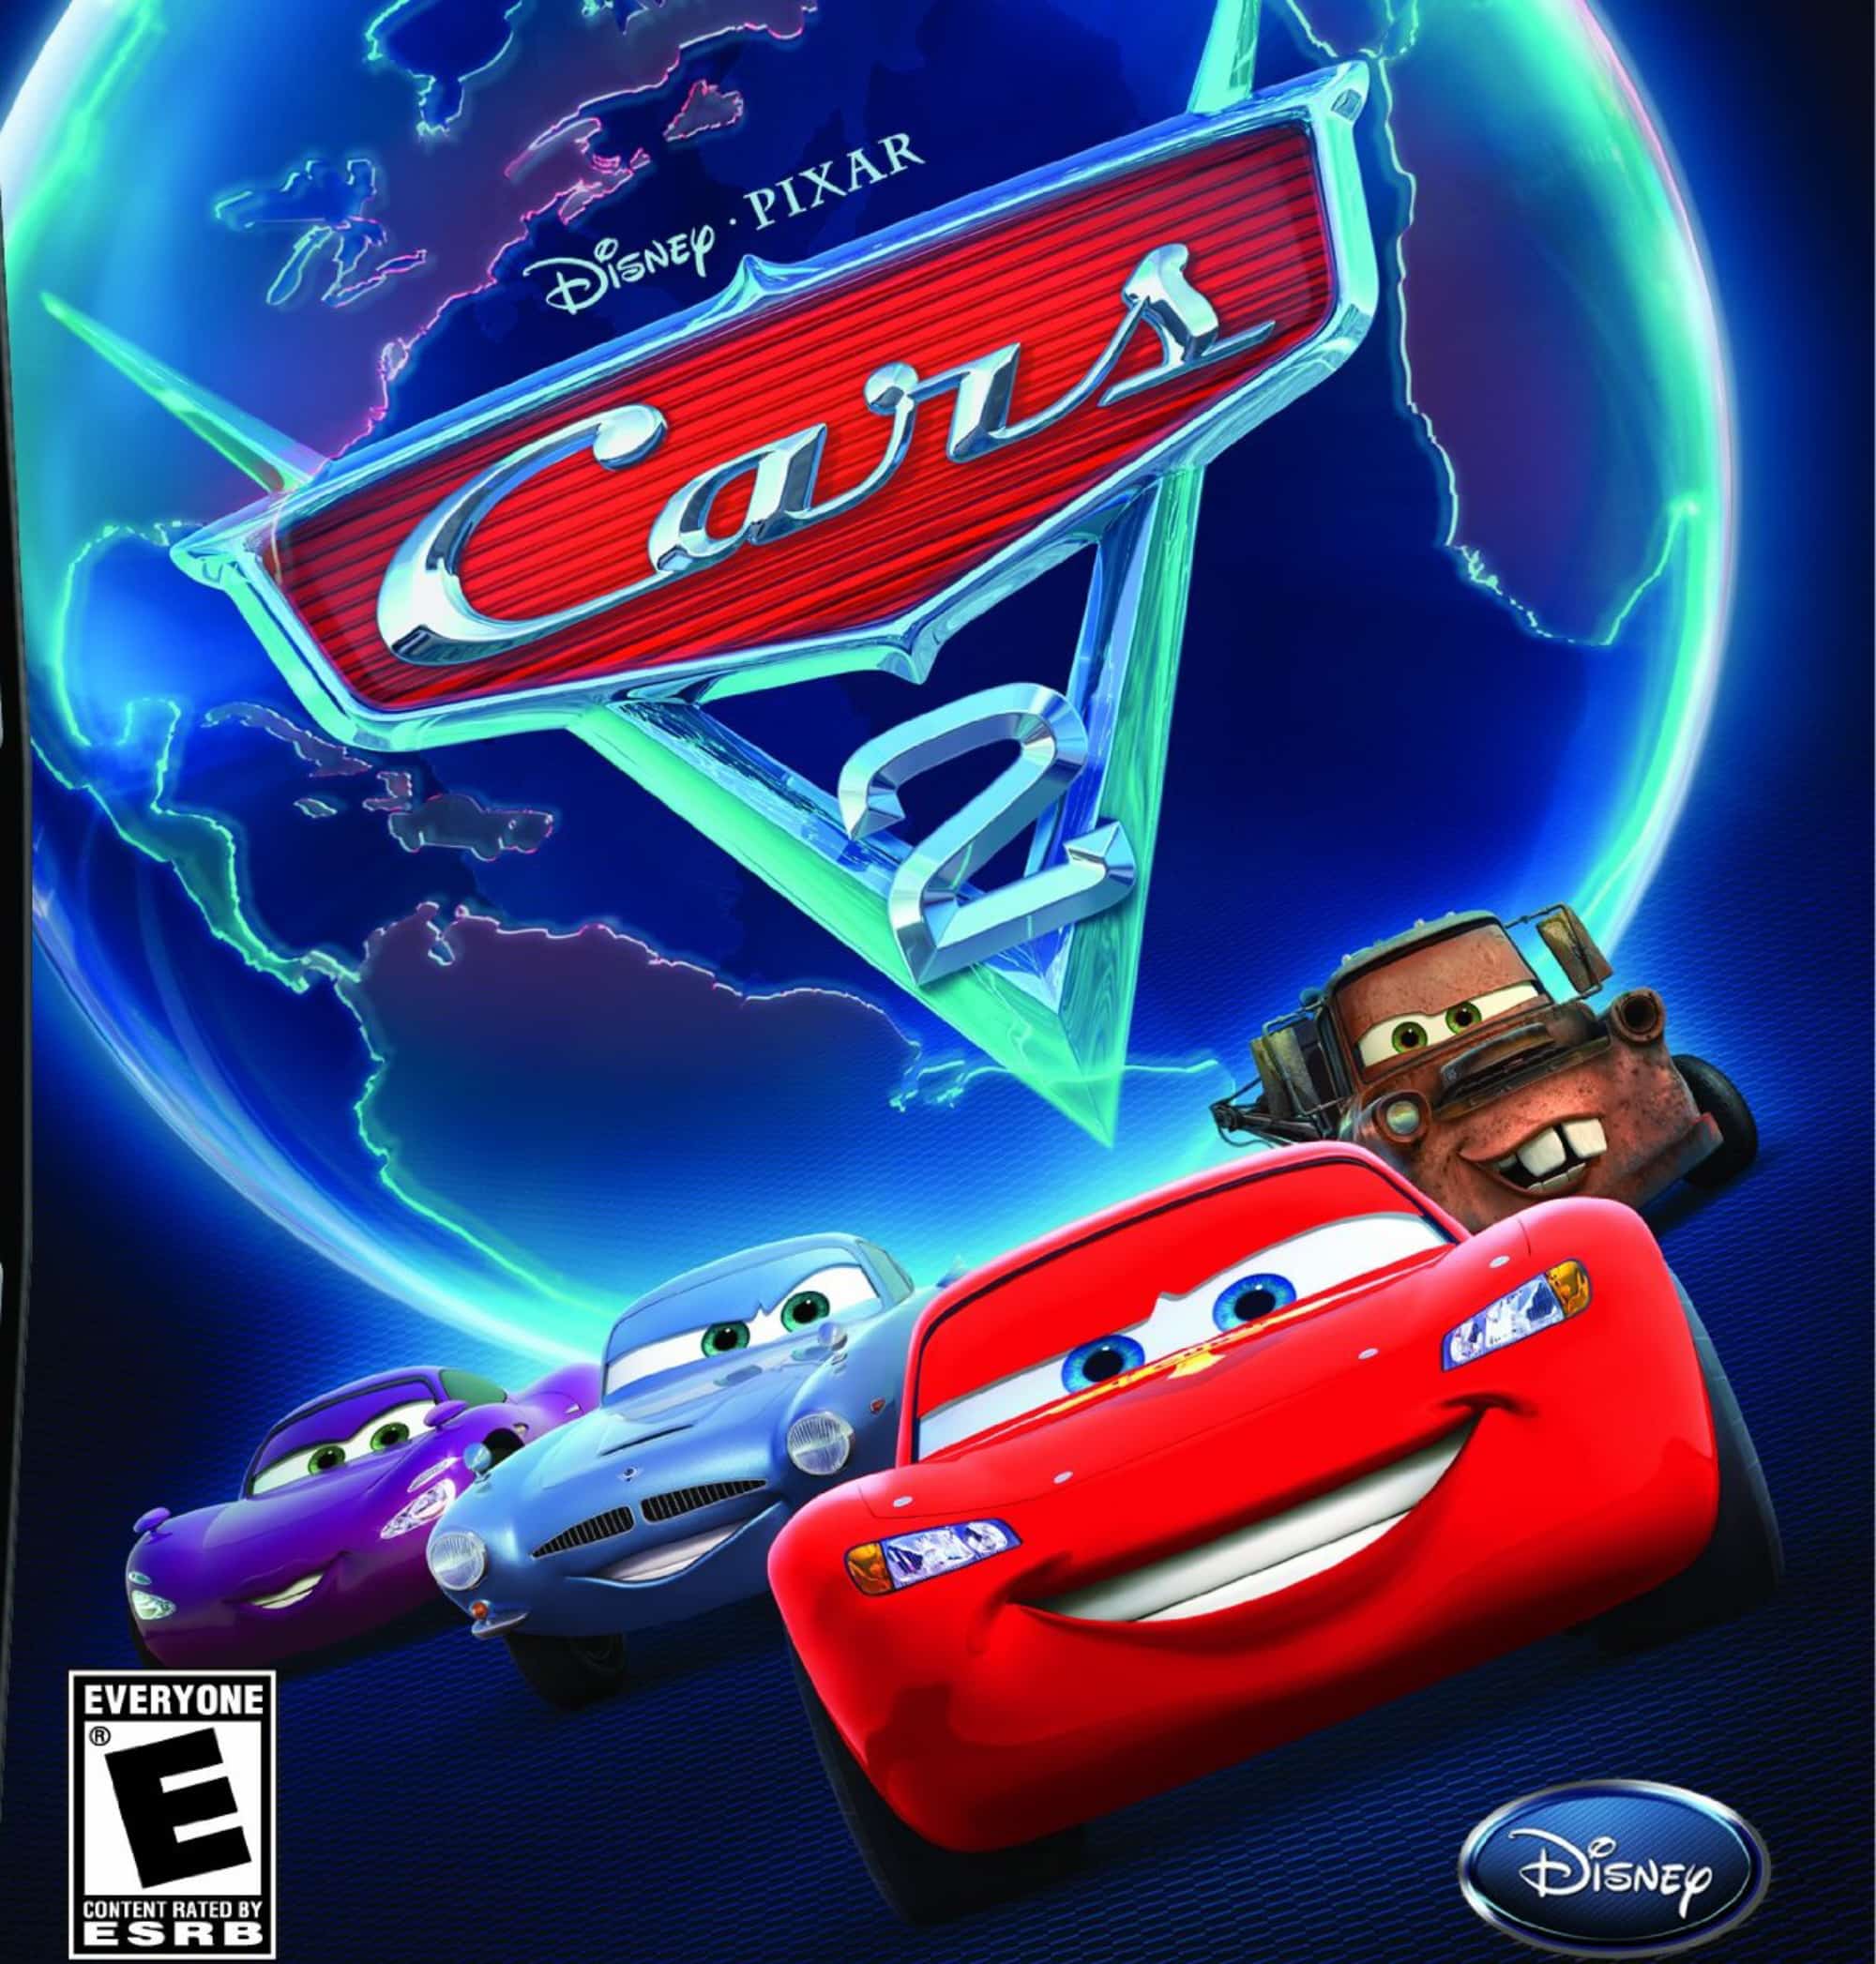 Cars 2 The Video Game Walkthrough Guide Wii Xbox 360 Ps3 Pc Mac